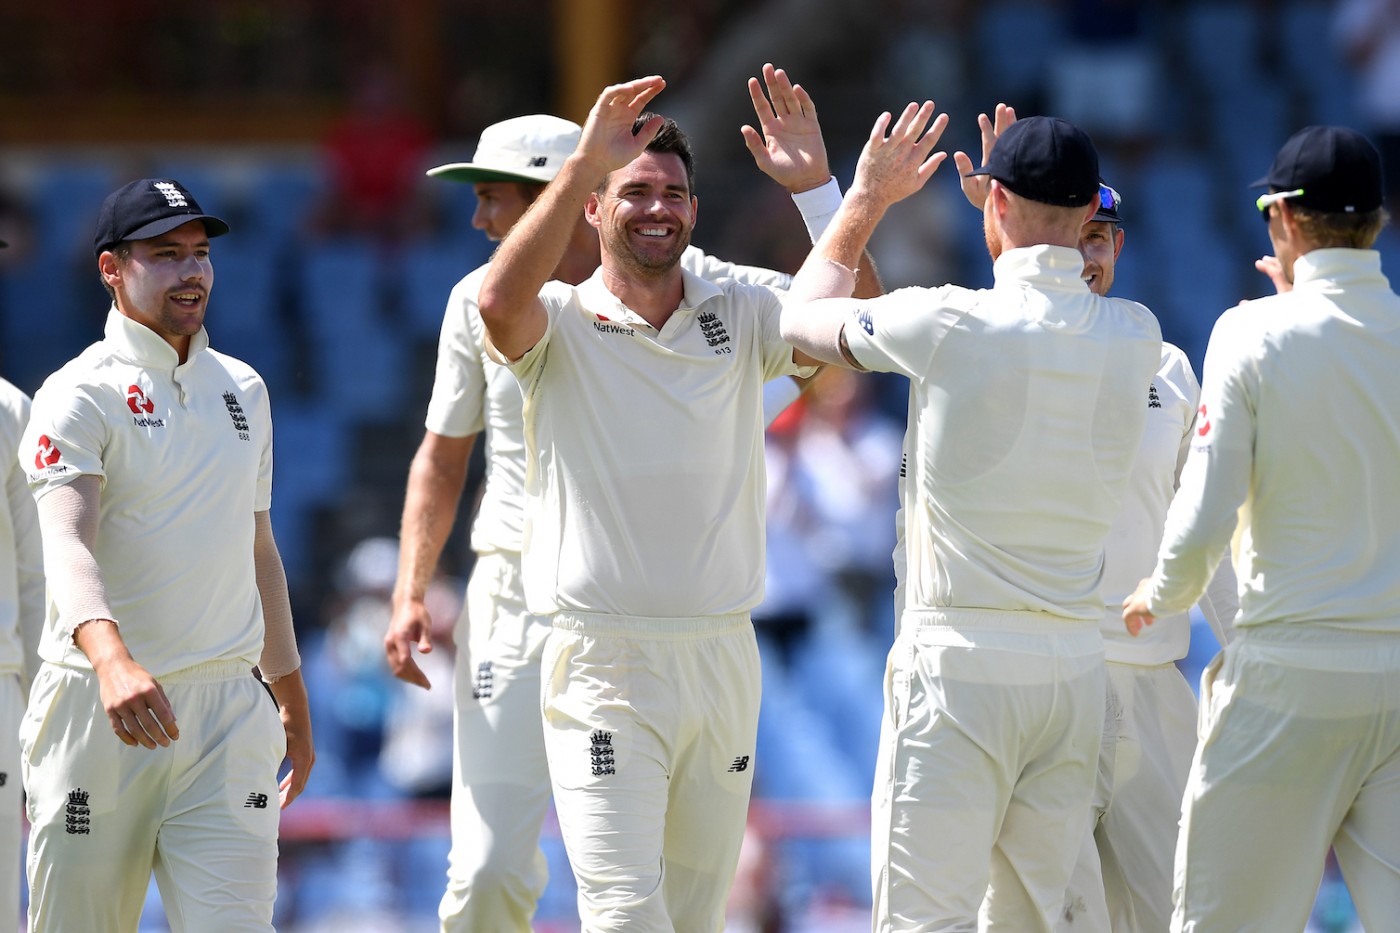 Jimmy Anderson celebrating a cricket wicket with other England players